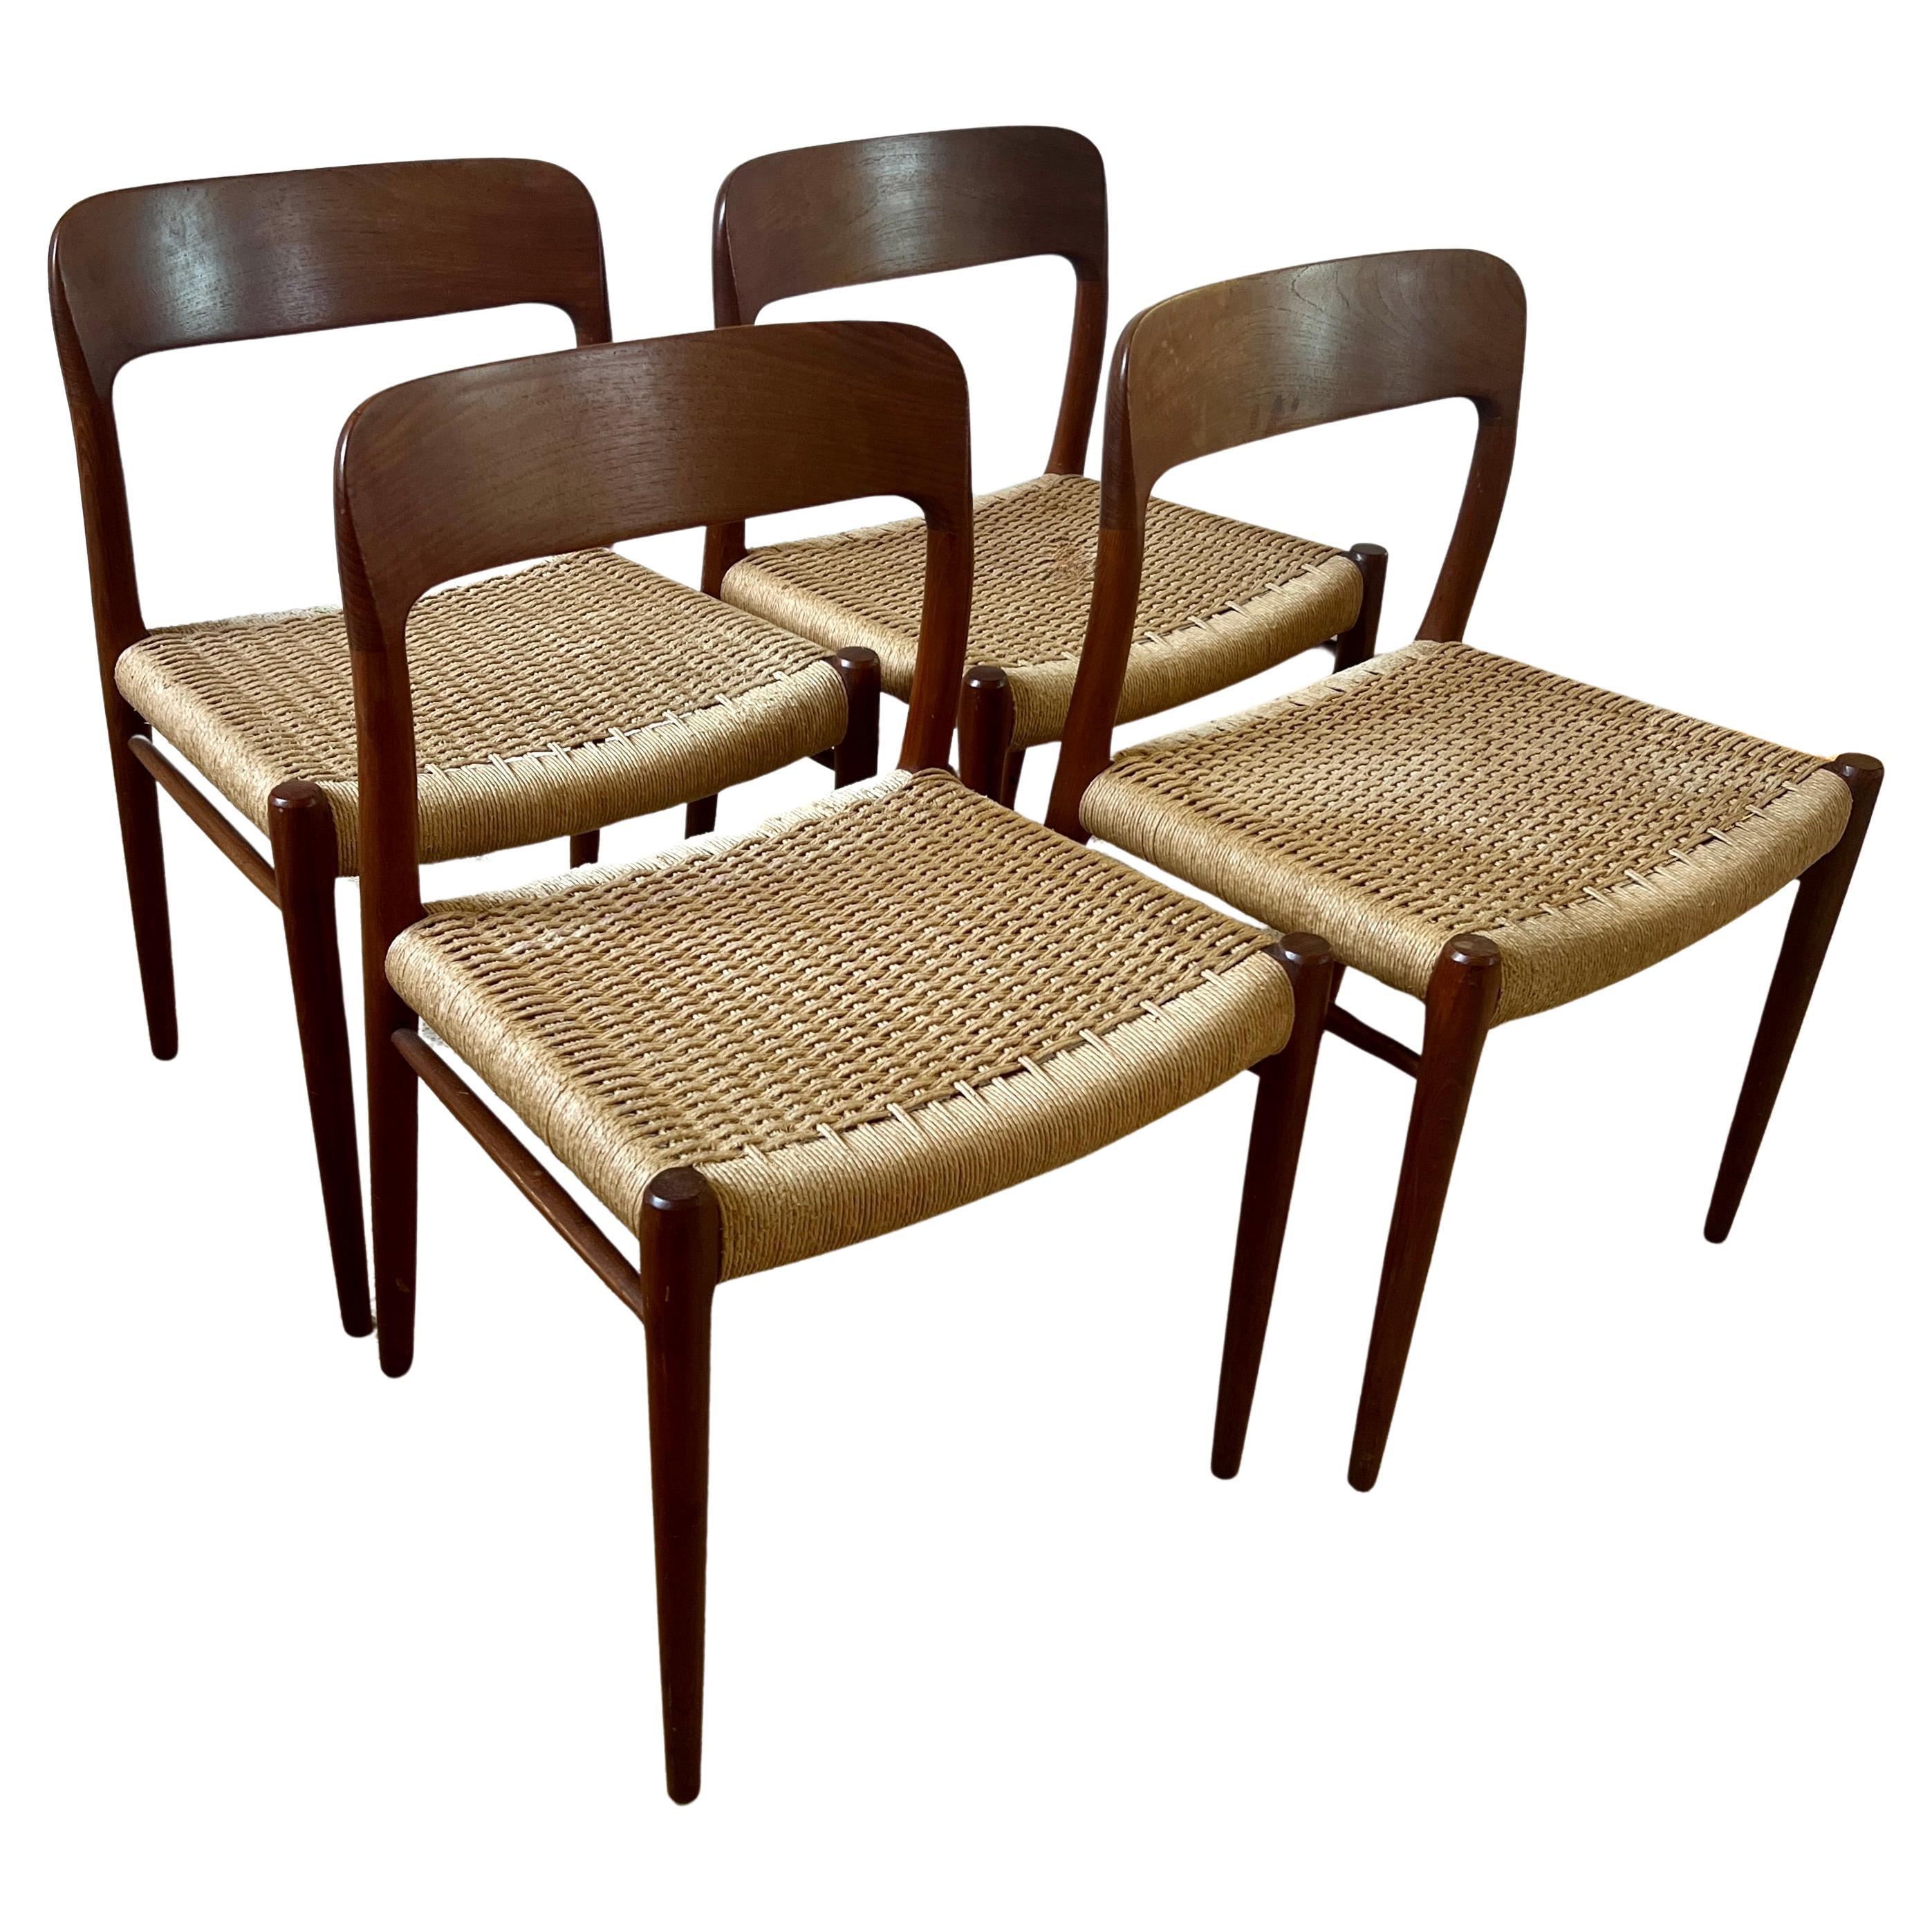 Four Niels Otto Moller Danish Dining Room Chairs with Hand Woven Seats For Sale